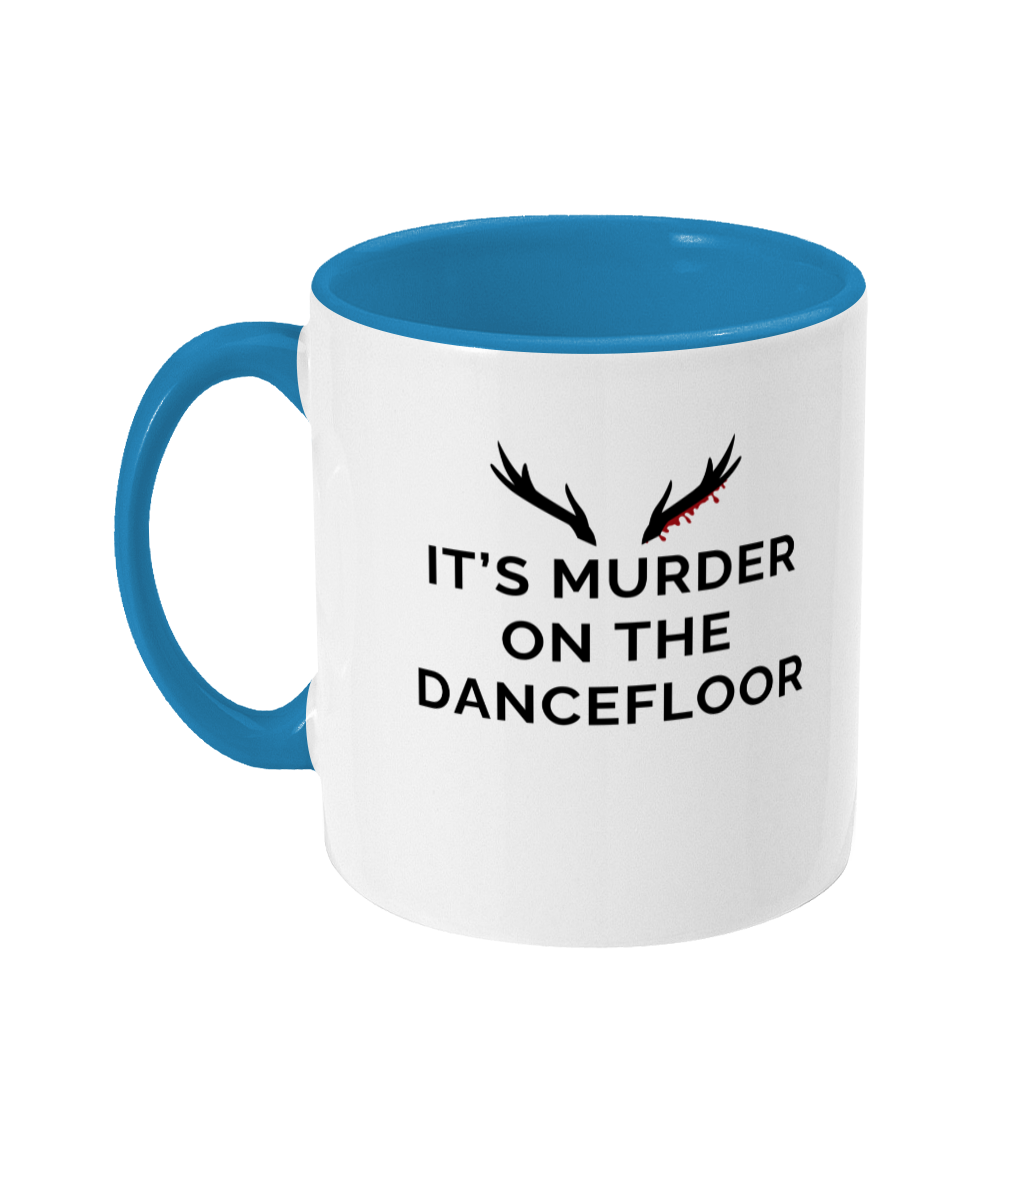 Mug with a blue handle and blue inner that reads "It's Murder On The Dancefloor" with antlers above the text with blood drips coming from the right bottom antler